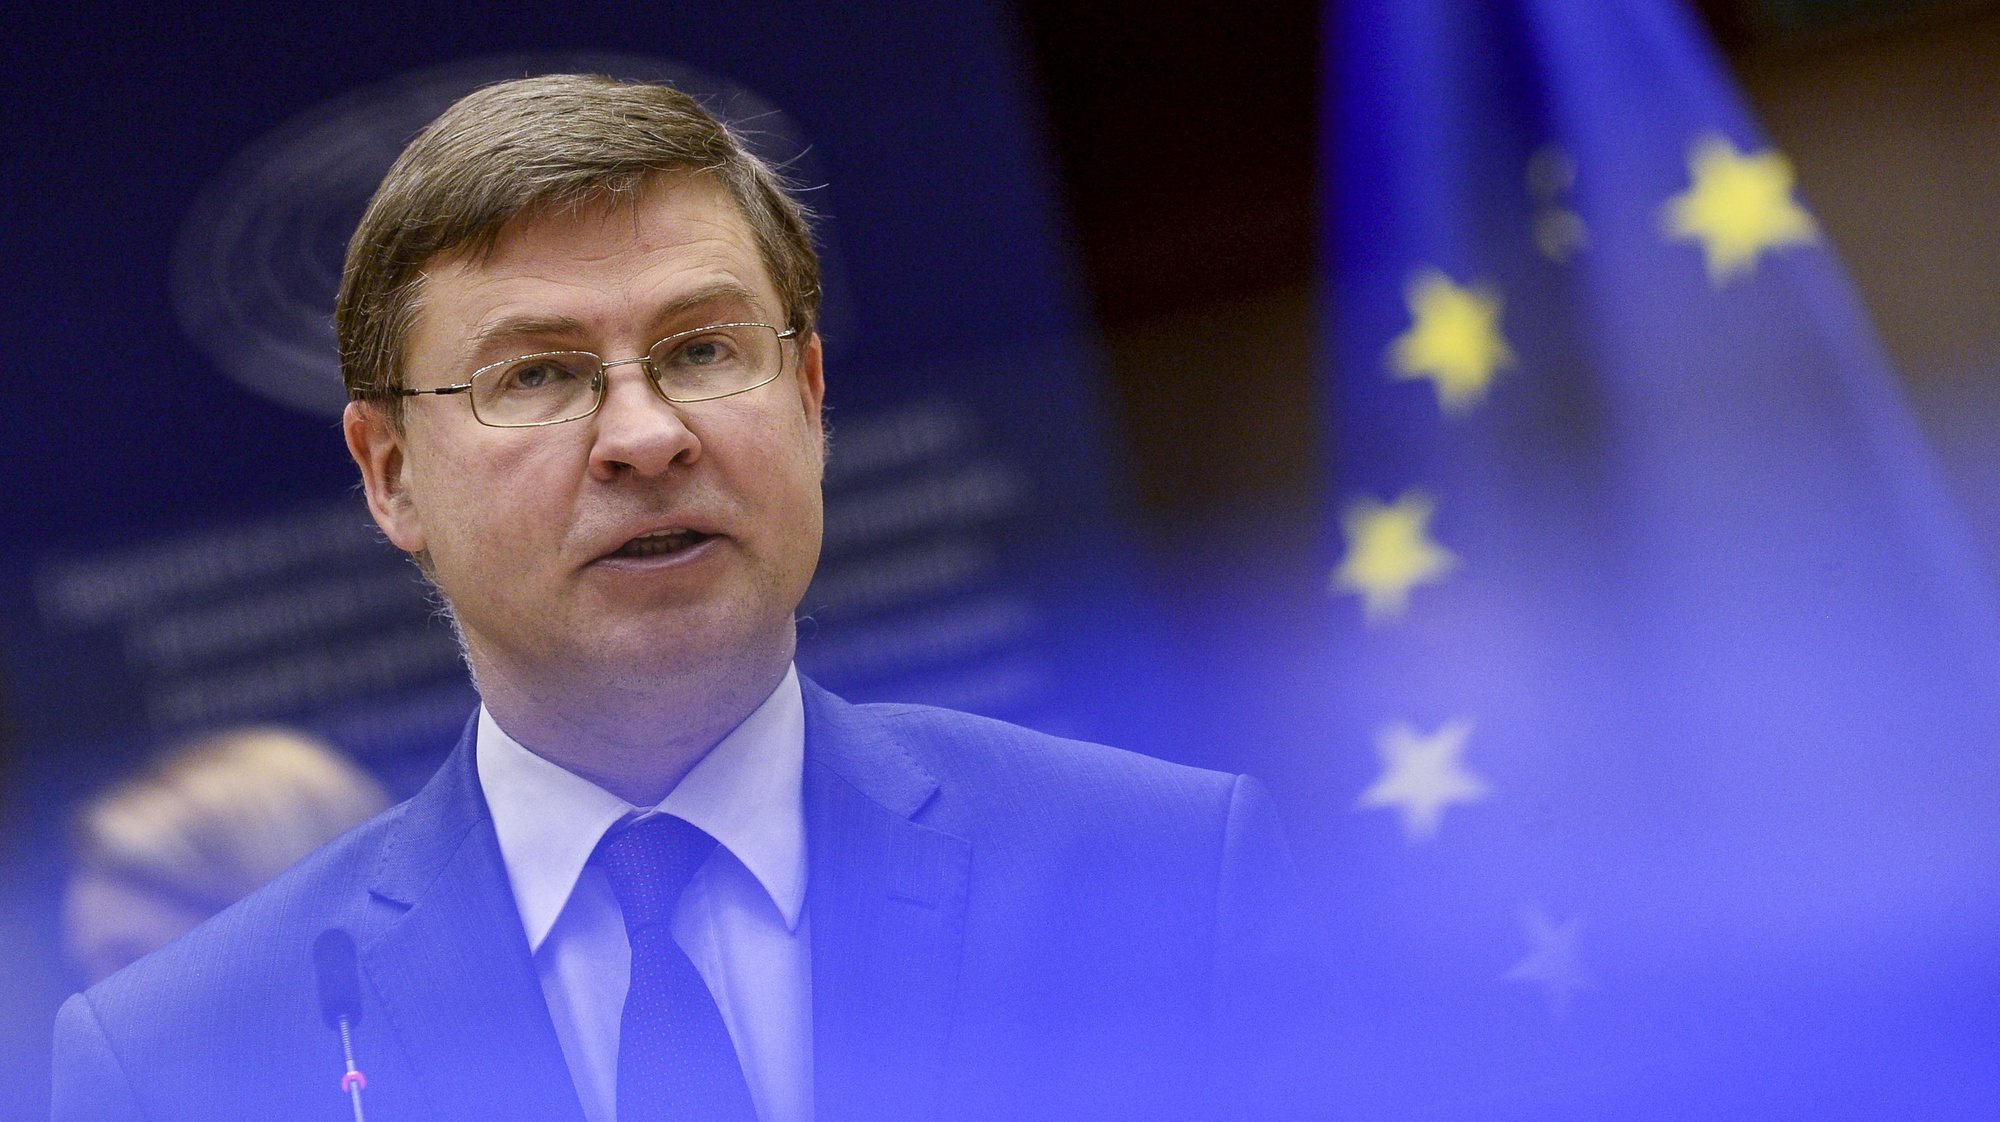 epa09064910 European Commission Vice-President Valdis Dombrovskis speaks during a plenary session at the European Parliament in Brussels, Belgium, 10 March 2021.  EPA/JOHANNA GERON / POOL